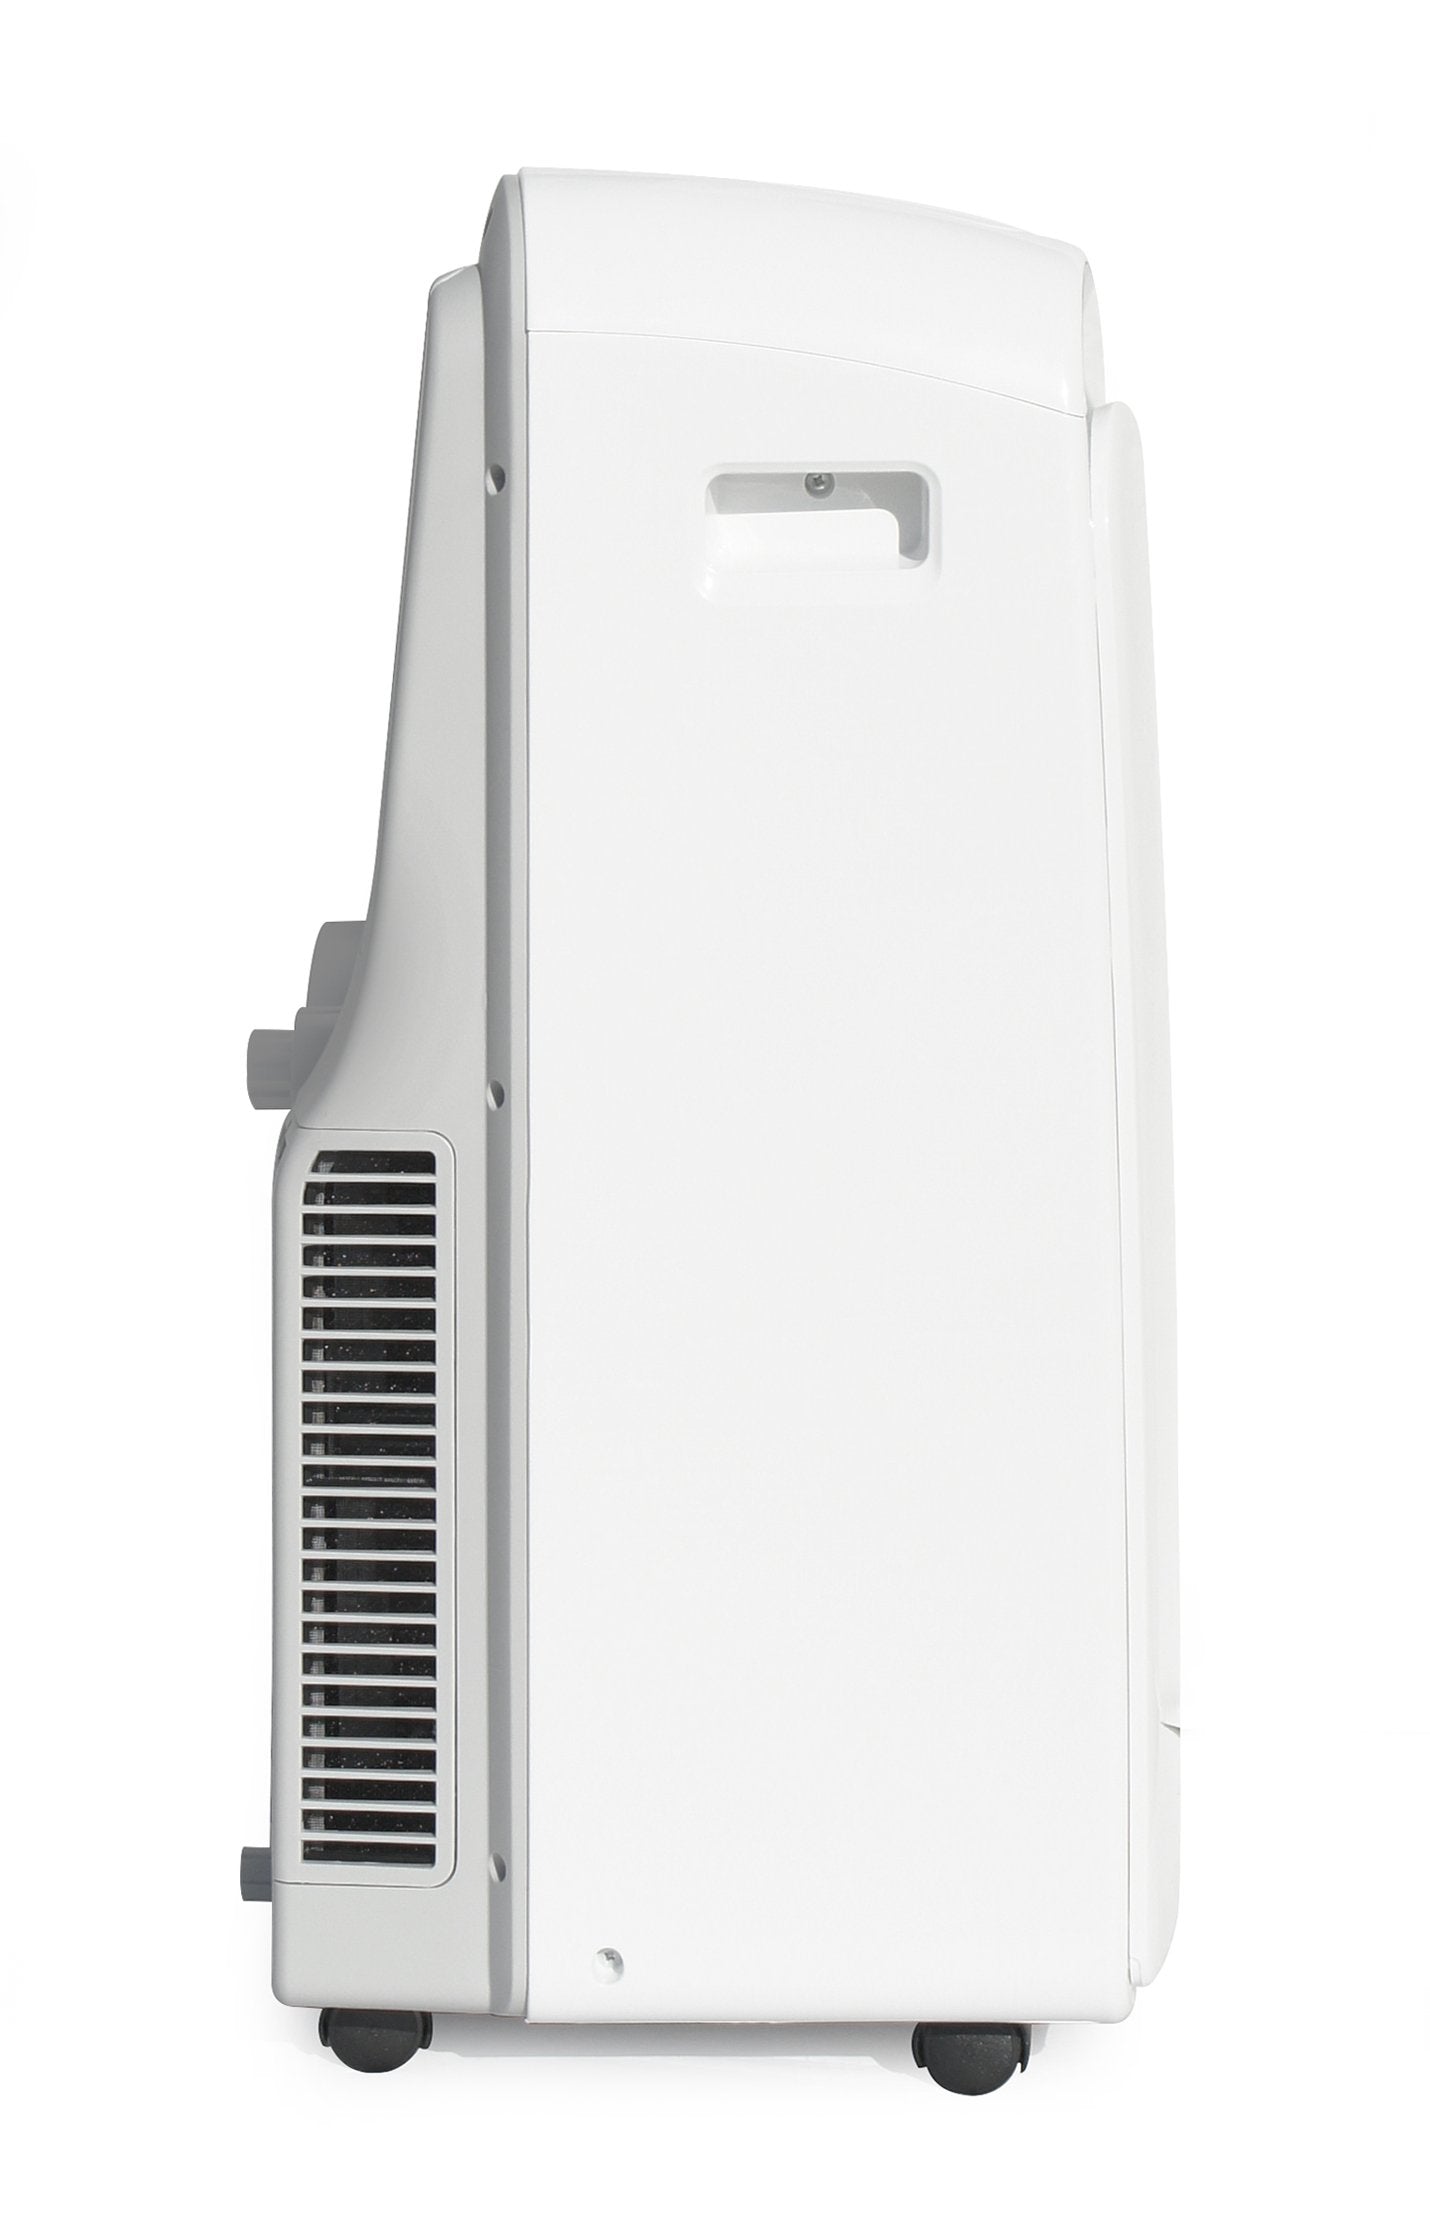 [SPT WA-S1032E] Portable Air Conditioner| 13,500BTU| Cooling only